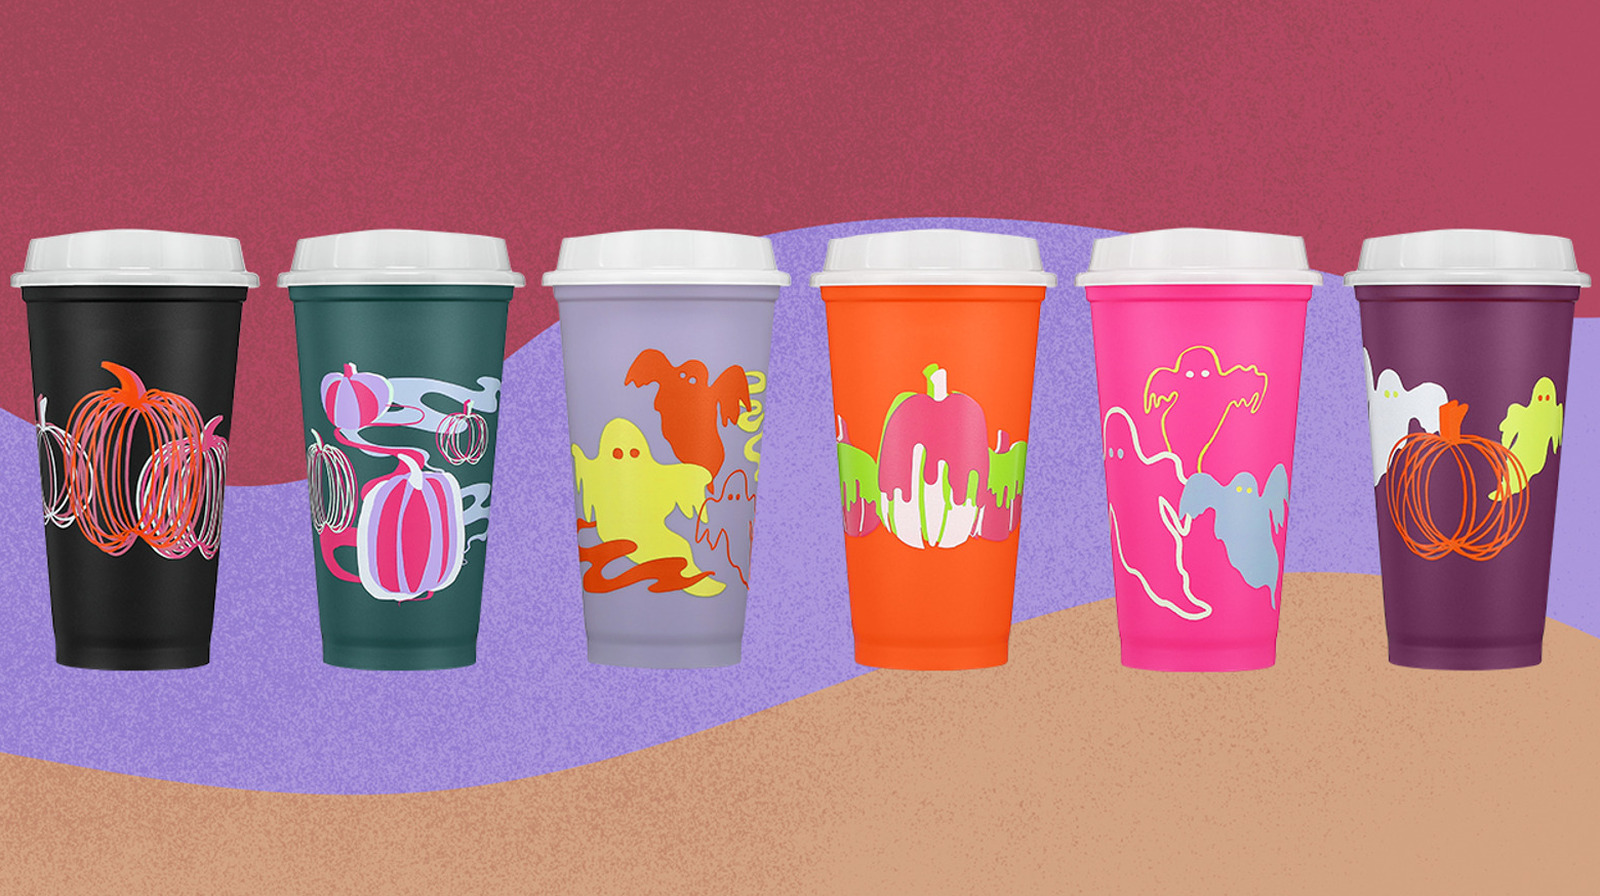 https://www.thedailymeal.com/img/gallery/starbucks-is-gearing-up-for-spooky-season-with-its-latest-line-of-reusable-drinkware/l-intro-1694544012.jpg